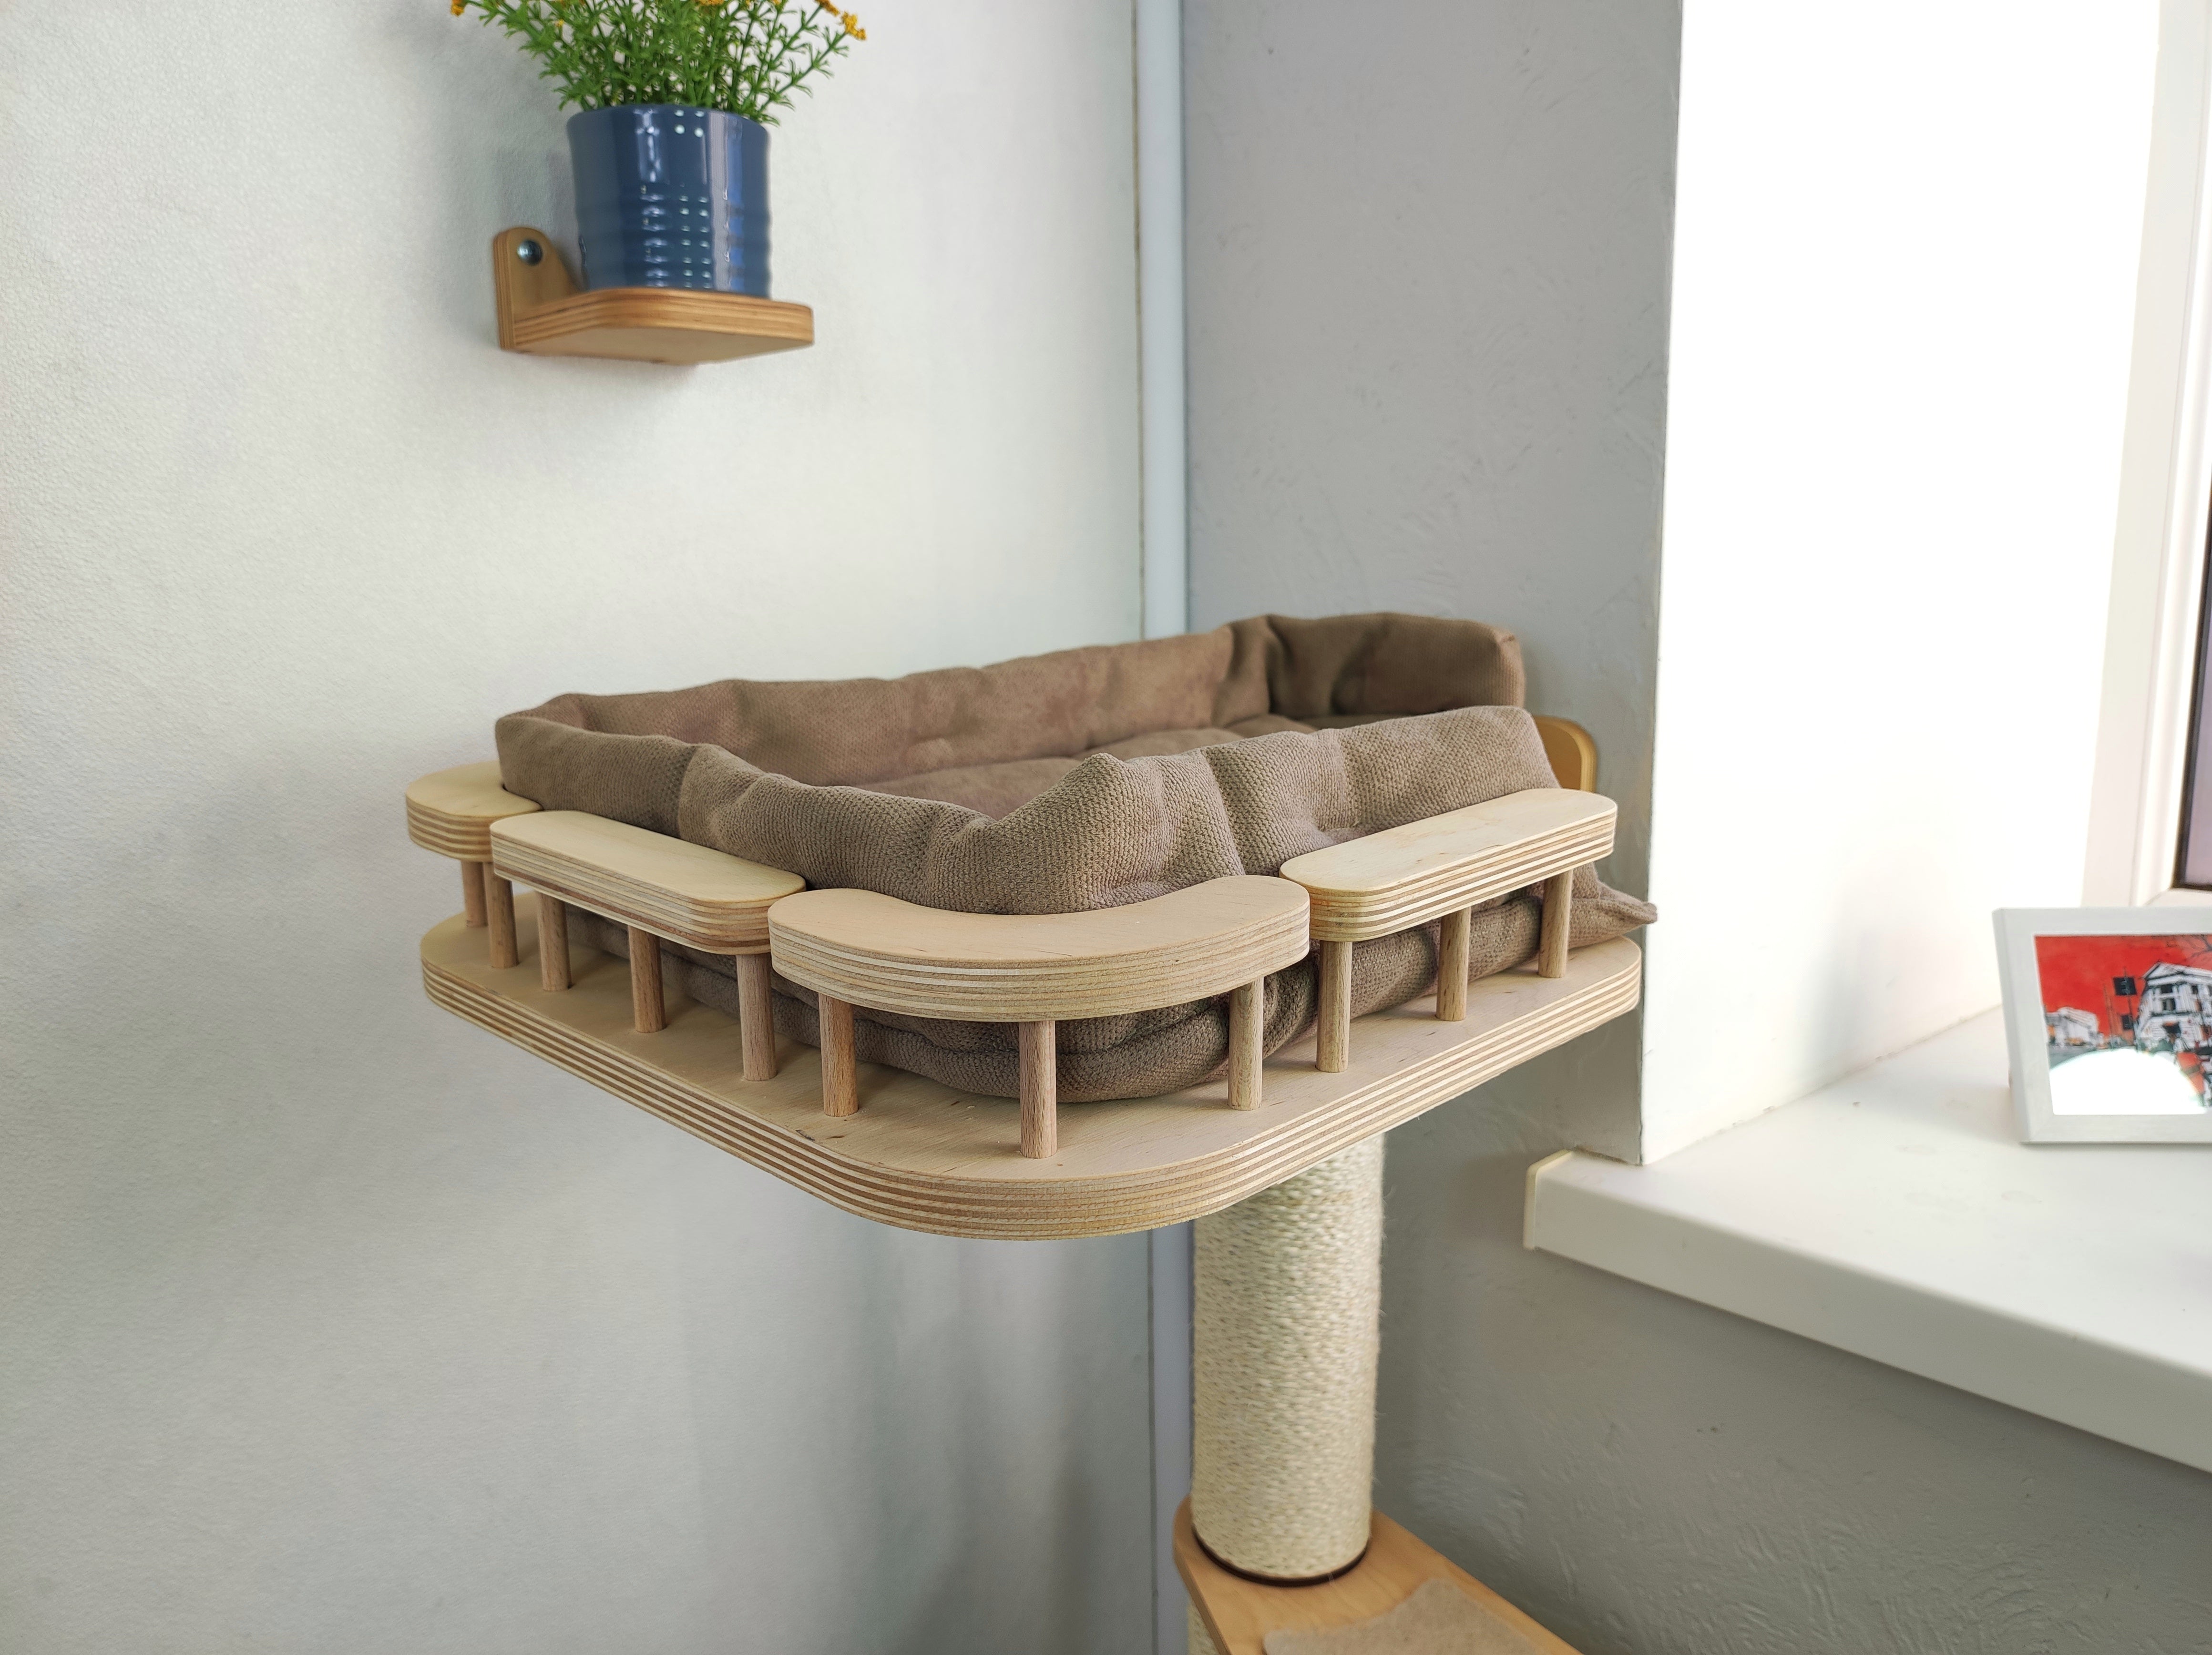 Cat light shelf with soft cushion by the window is made of plywood